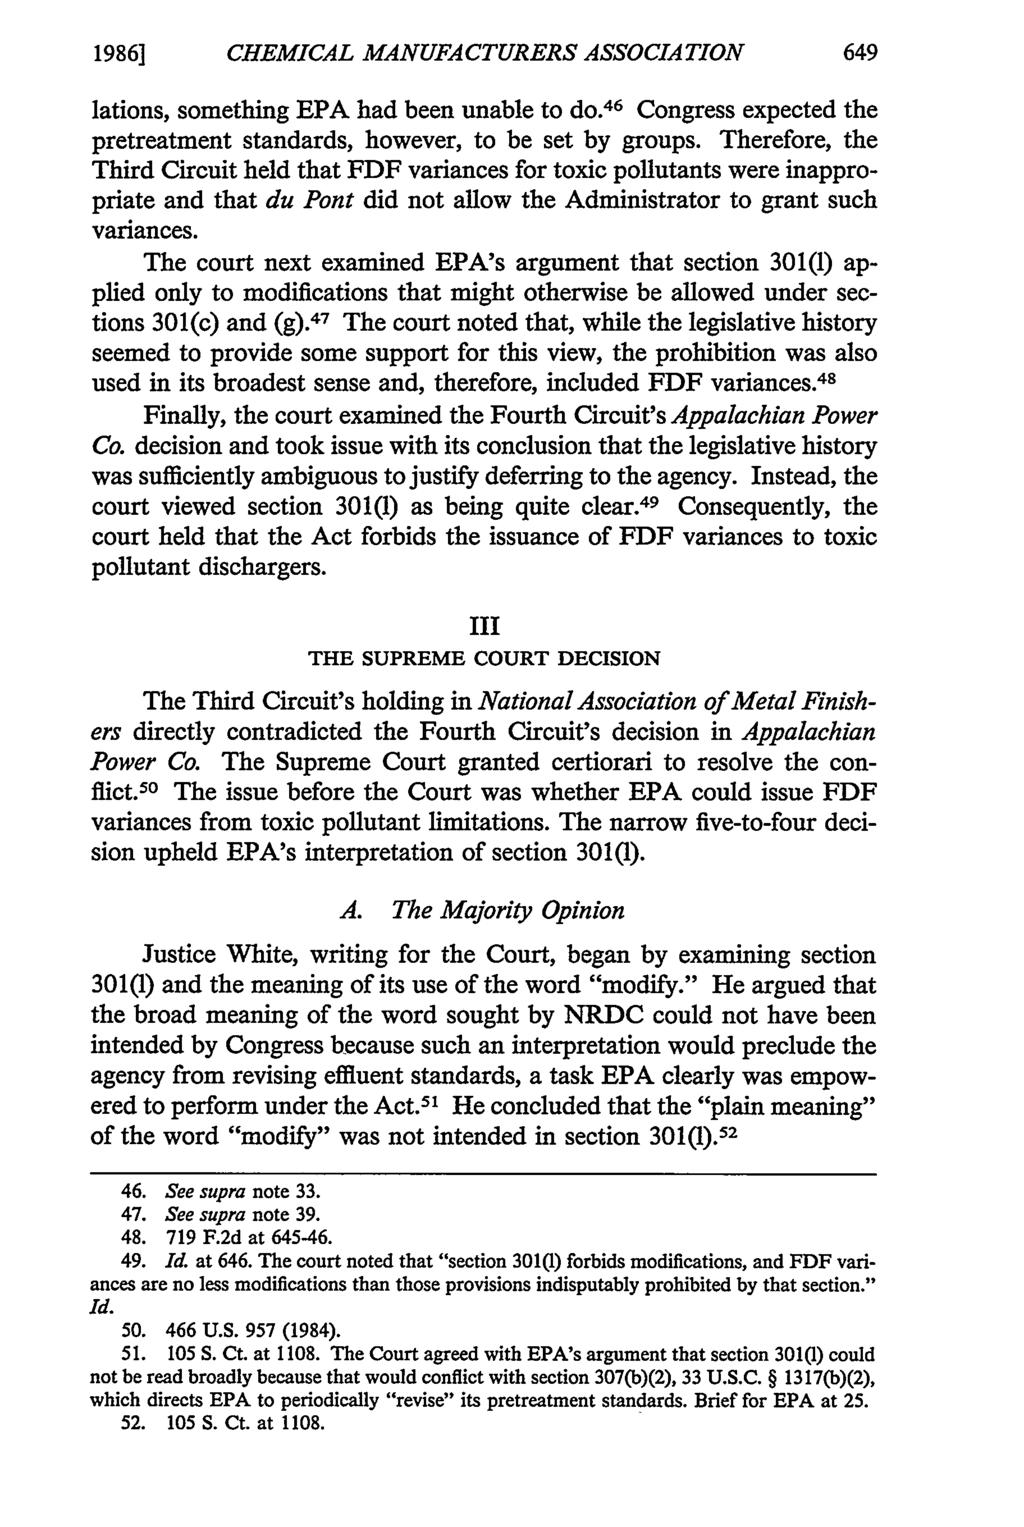 1986] CHEMICAL MANUFACTURERS ASSOCIATION lations, something EPA had been unable to do. 46 Congress expected the pretreatment standards, however, to be set by groups.